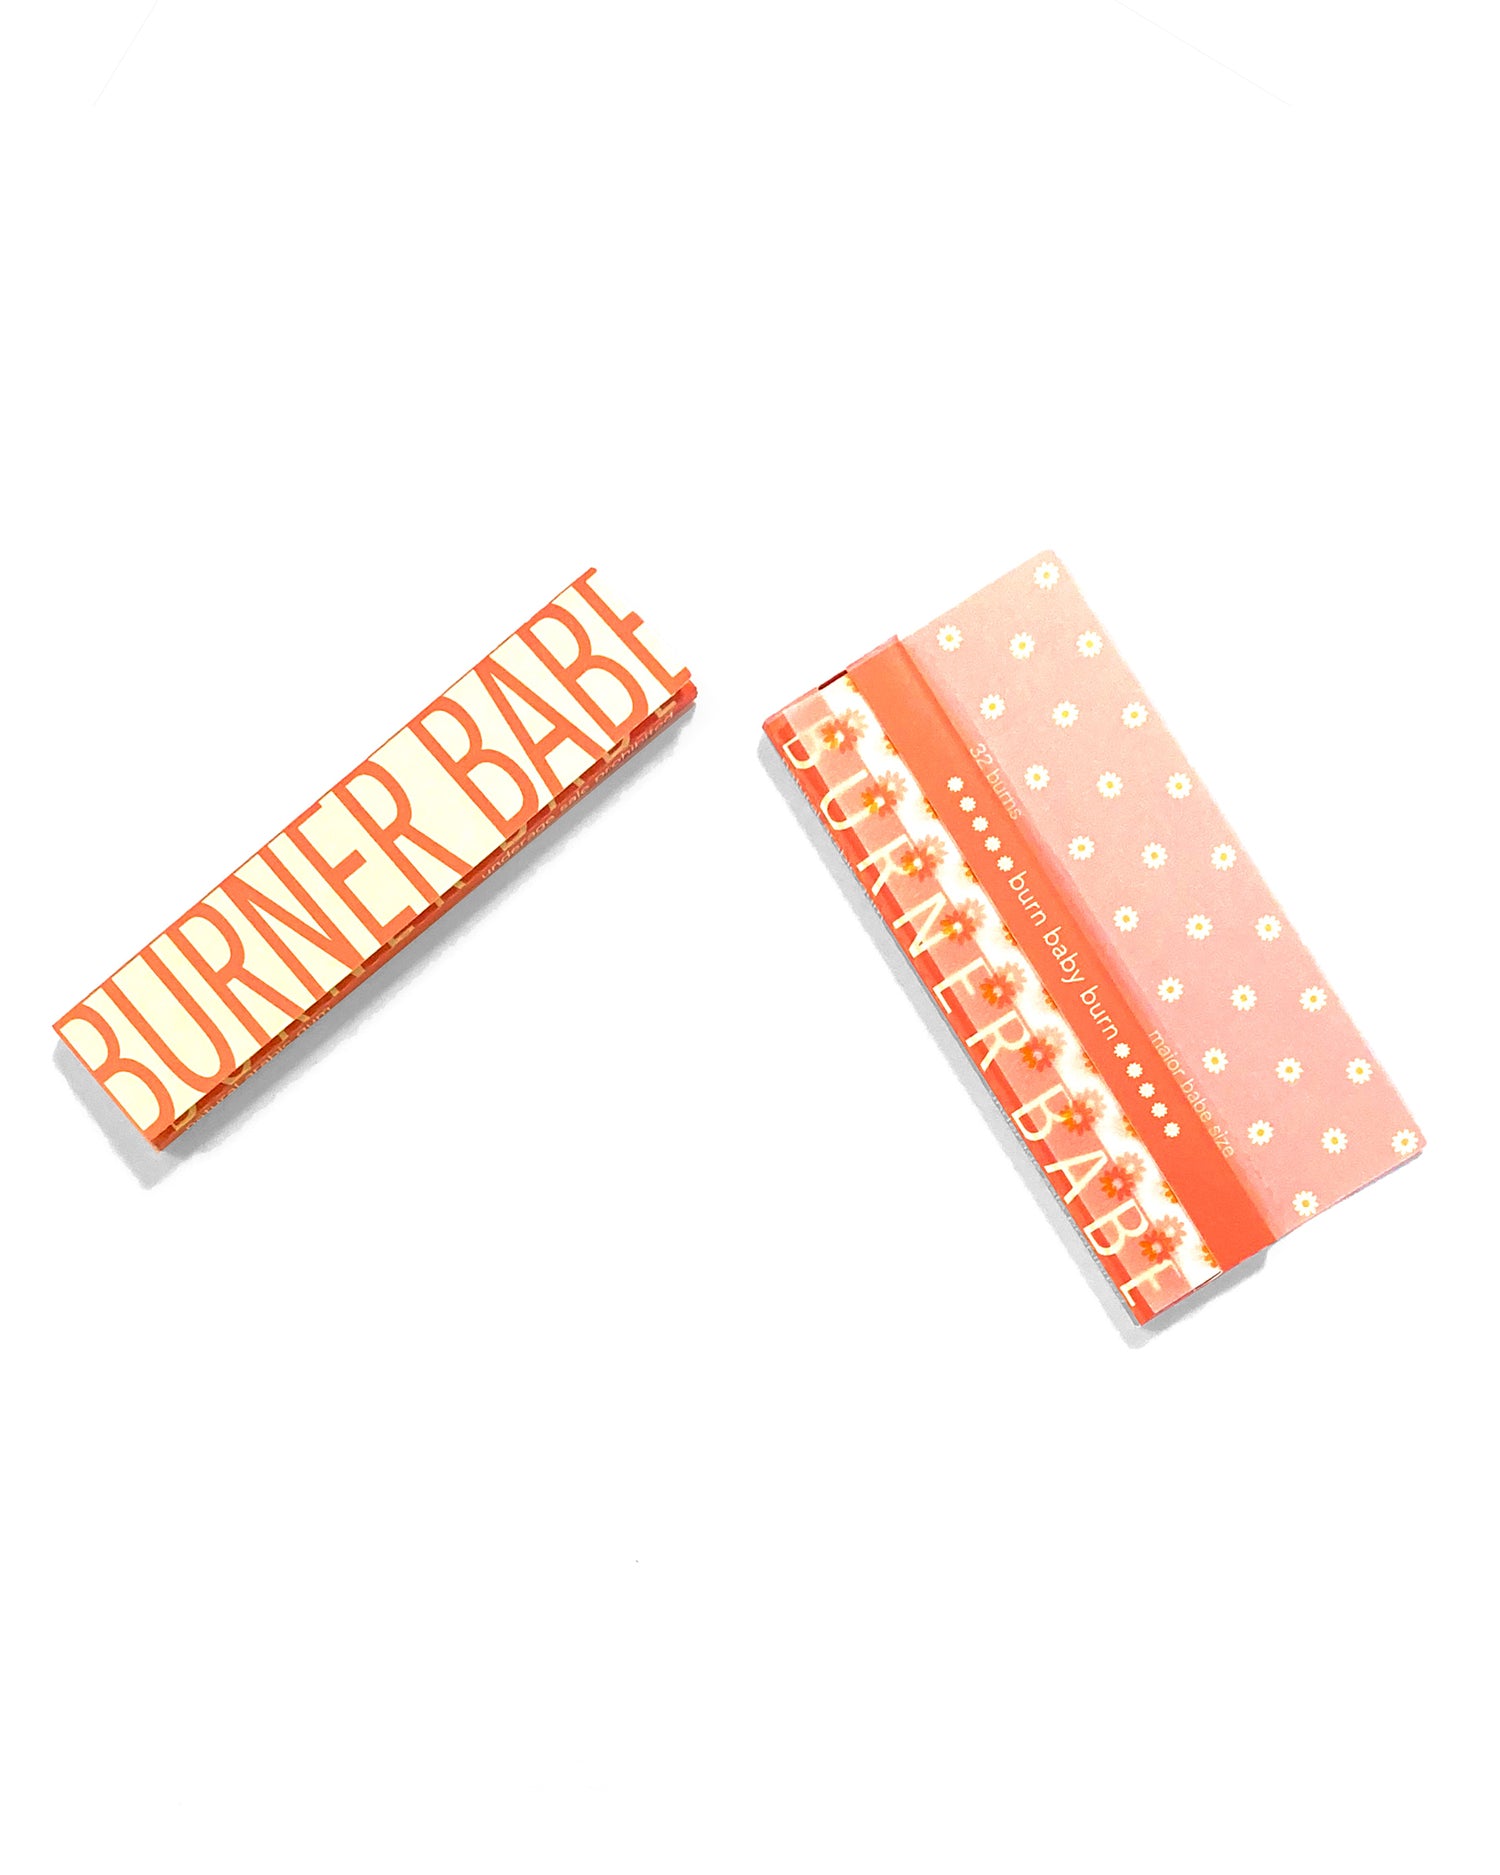 The Big Fleurt Papers, set of 10: Major Babe size pink and orange floral rolling papers. These designer papers are girly, pretty, vegan, cute, cool, king size, high quality, even burn, natural dyes, best tasting, slow burn.